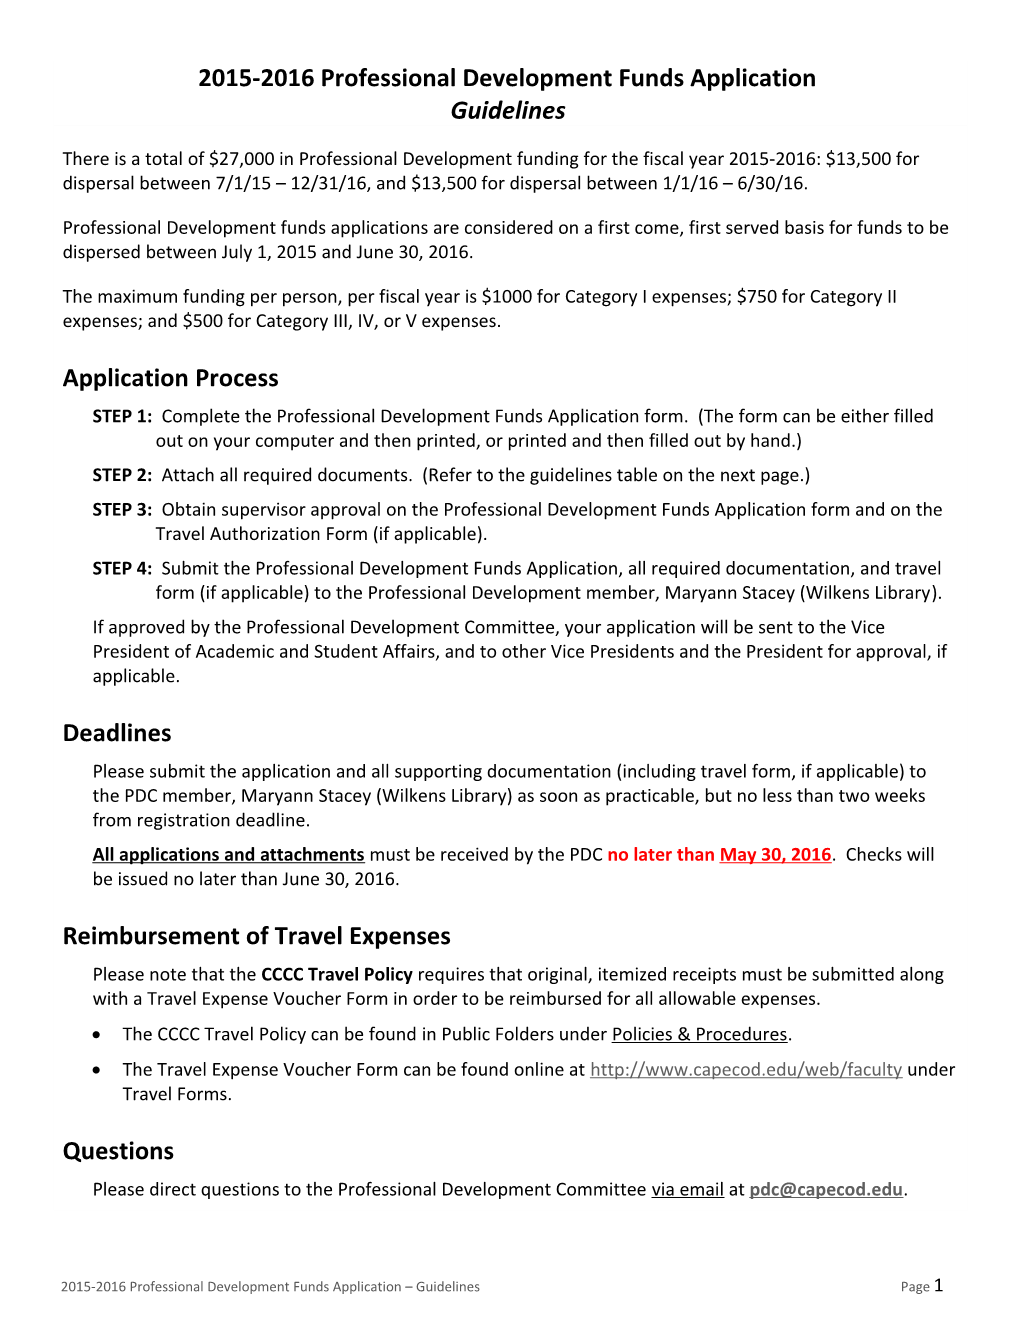 2015-2016Professional Development Funds Application Guidelinespage 1